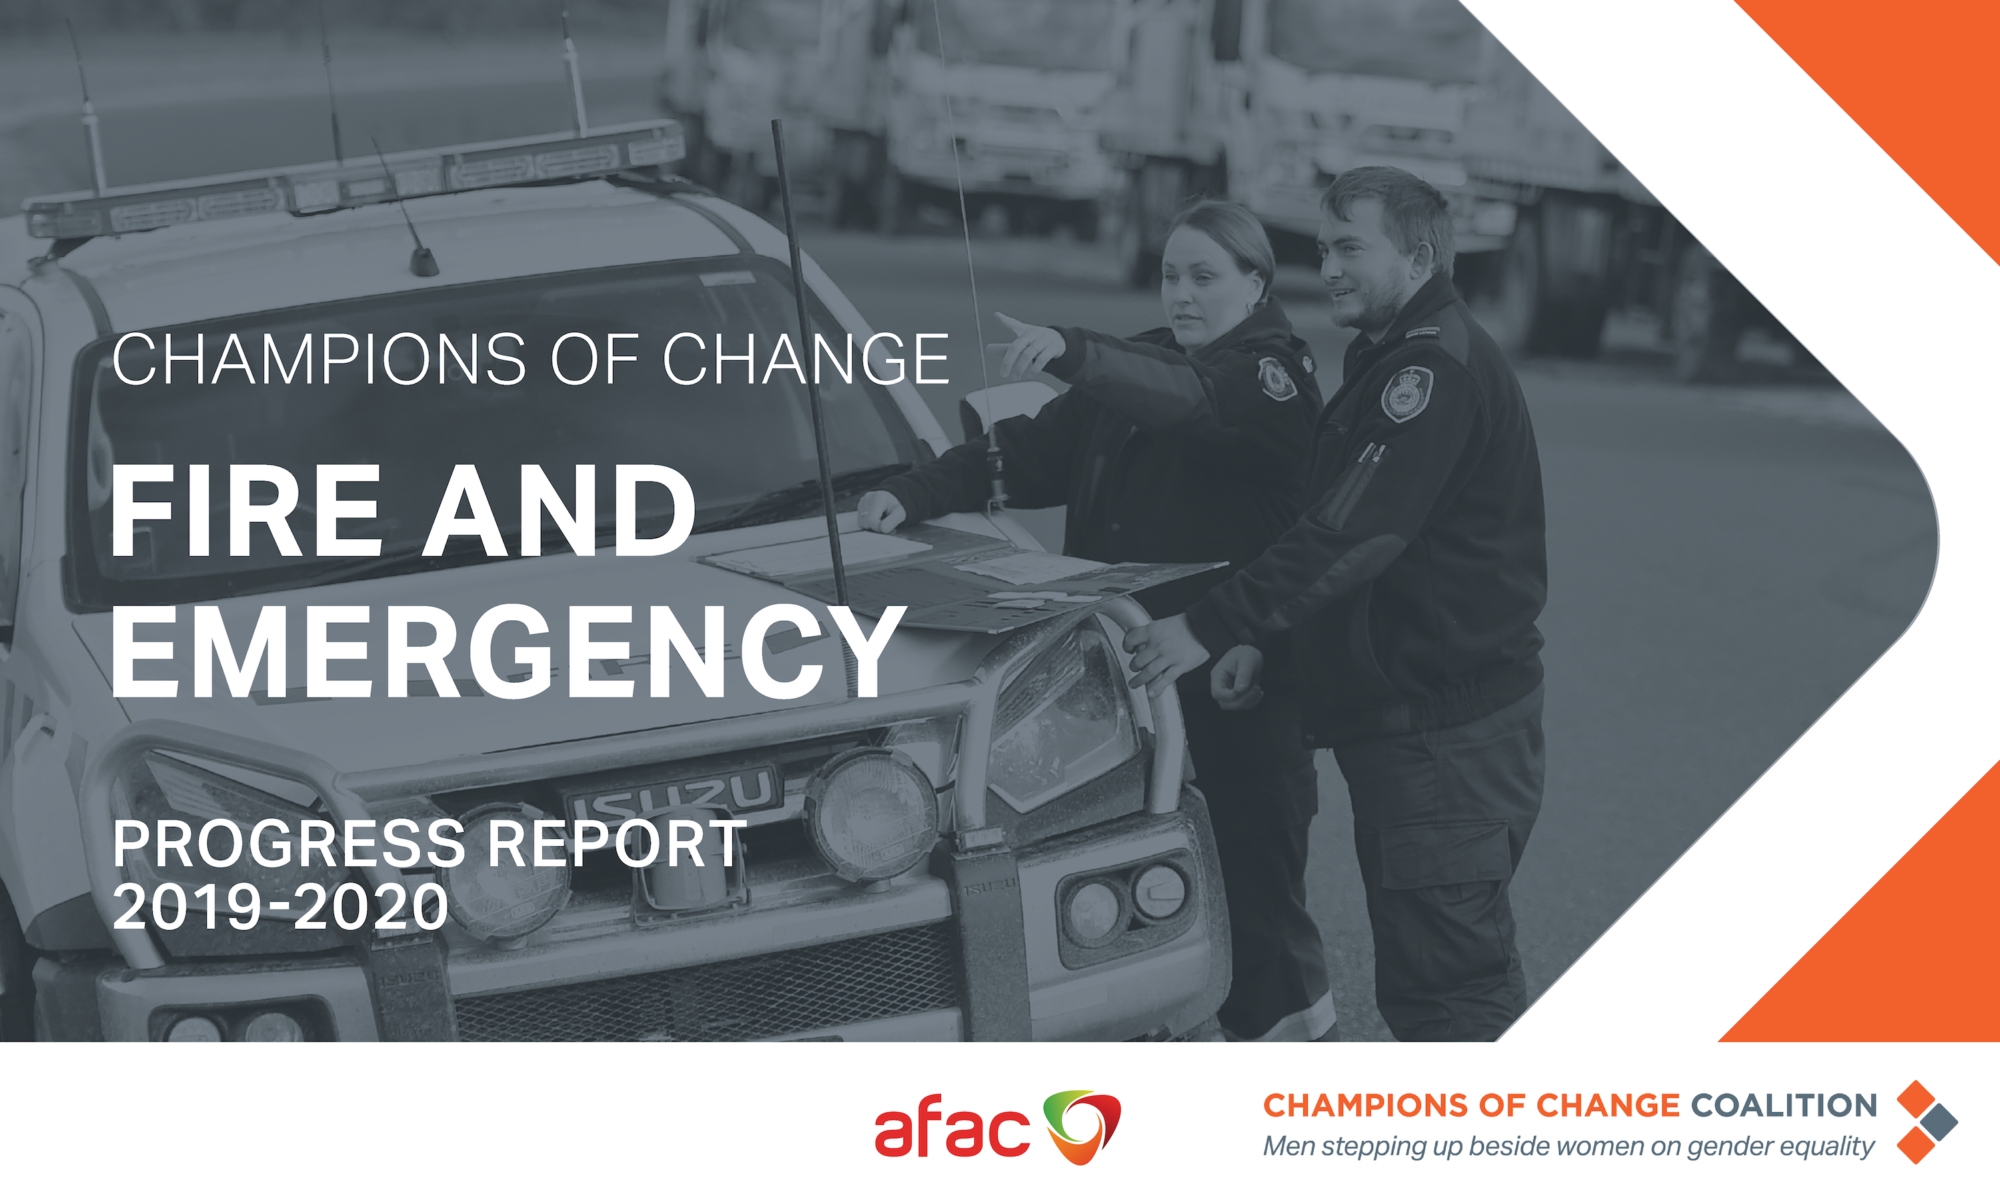 Champions of Change Fire and Emergency Progress Report 2020